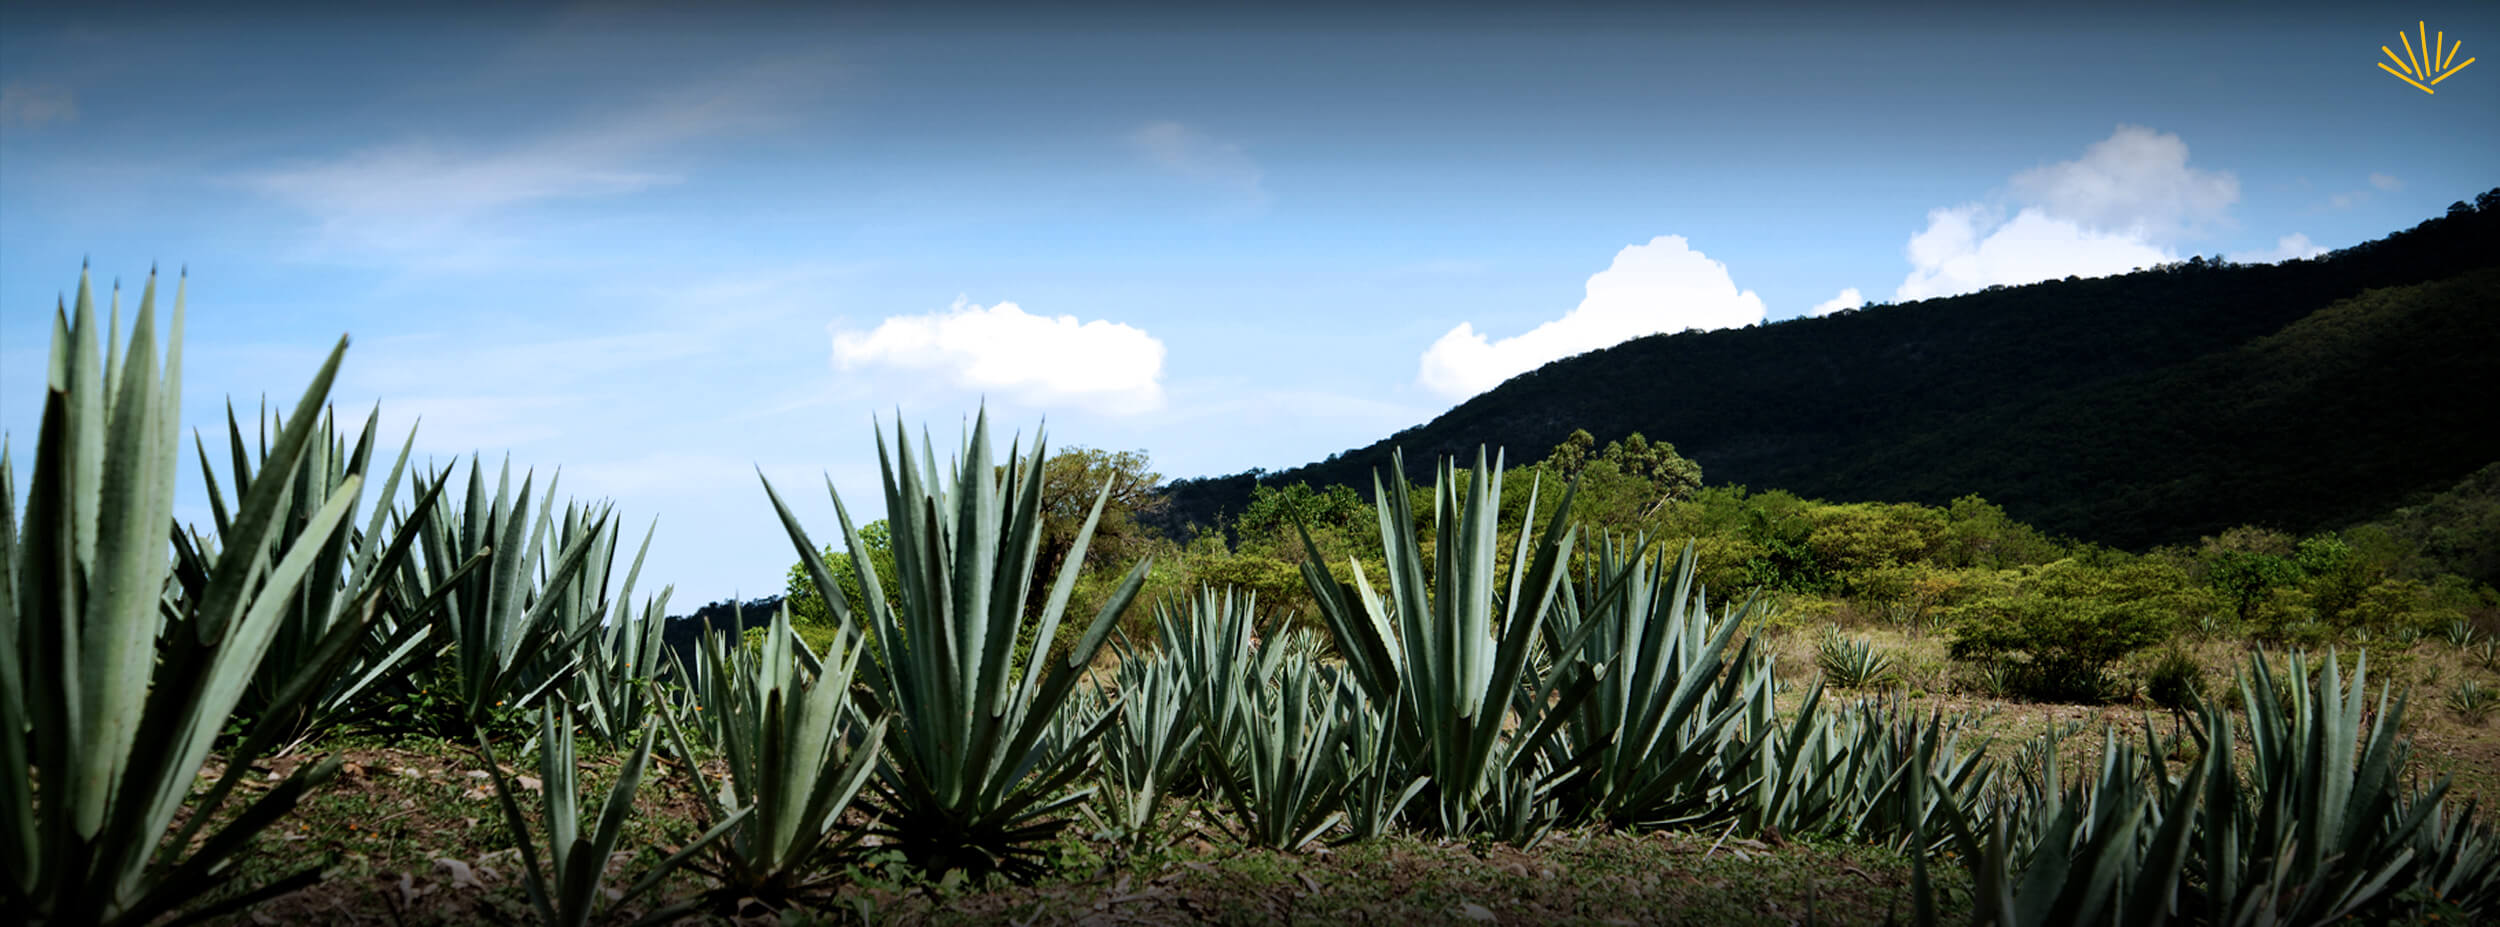 Agave in ancient Mexico